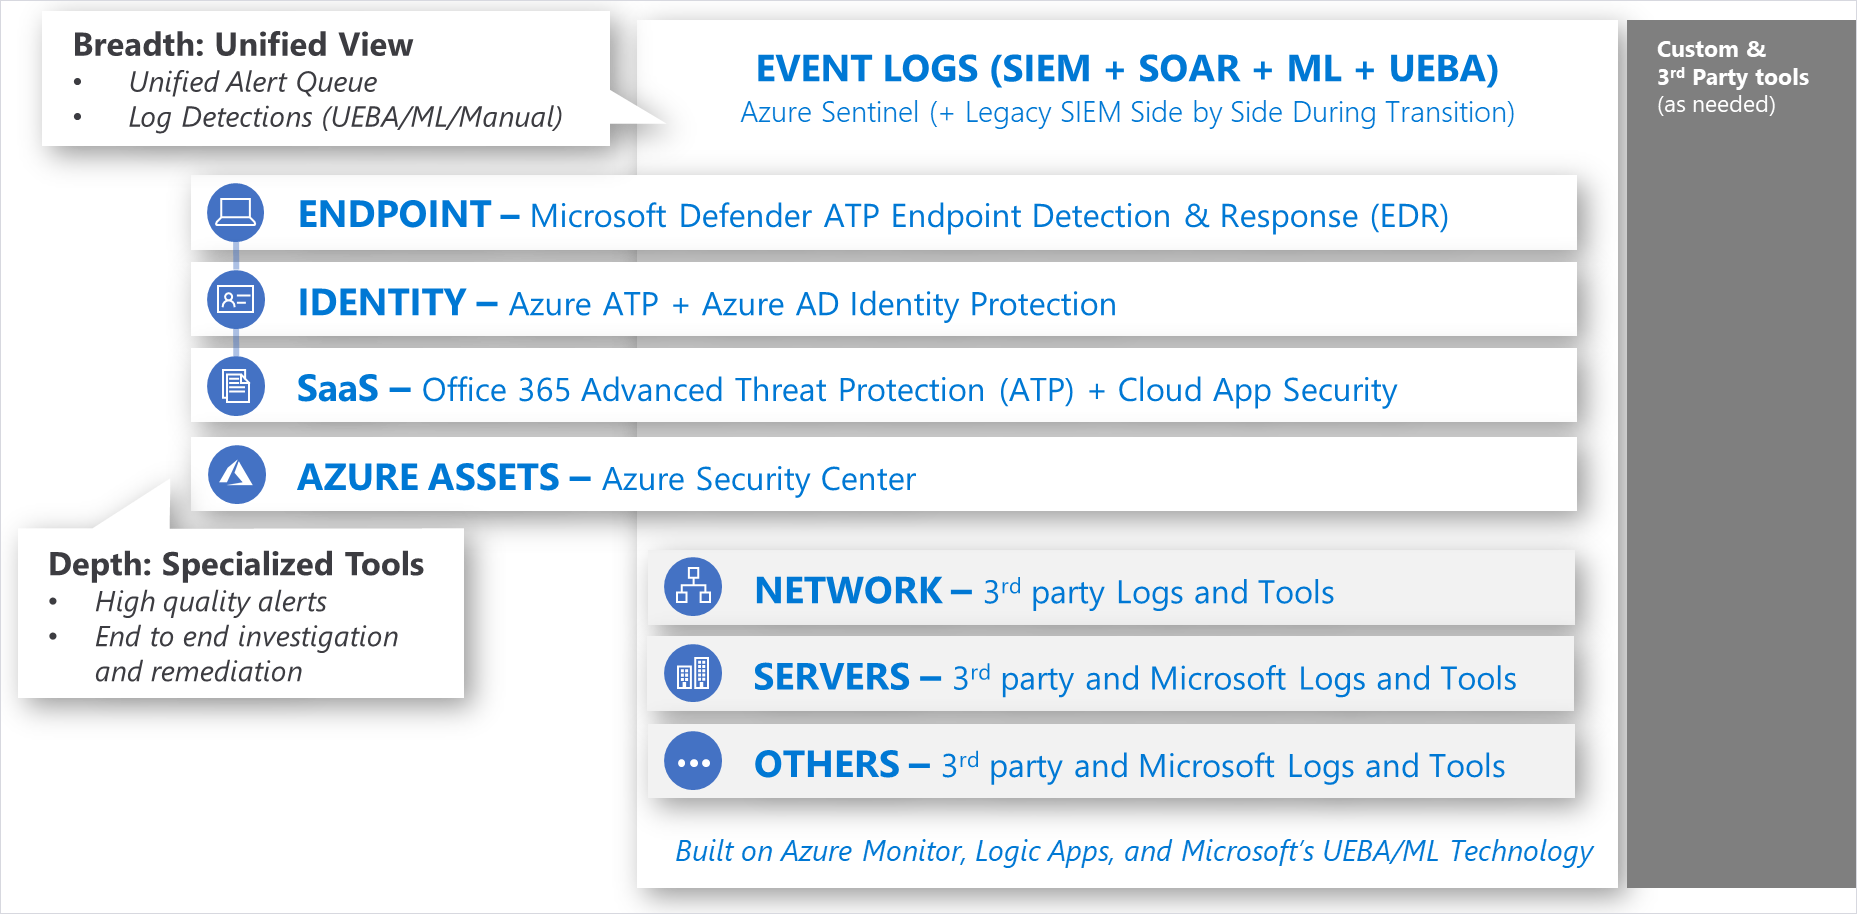 Infographic showing showing a unified view: Event logs, endpoint, identity, SaaS, Azure assets, network, servers, and 3rd party logs and tools.